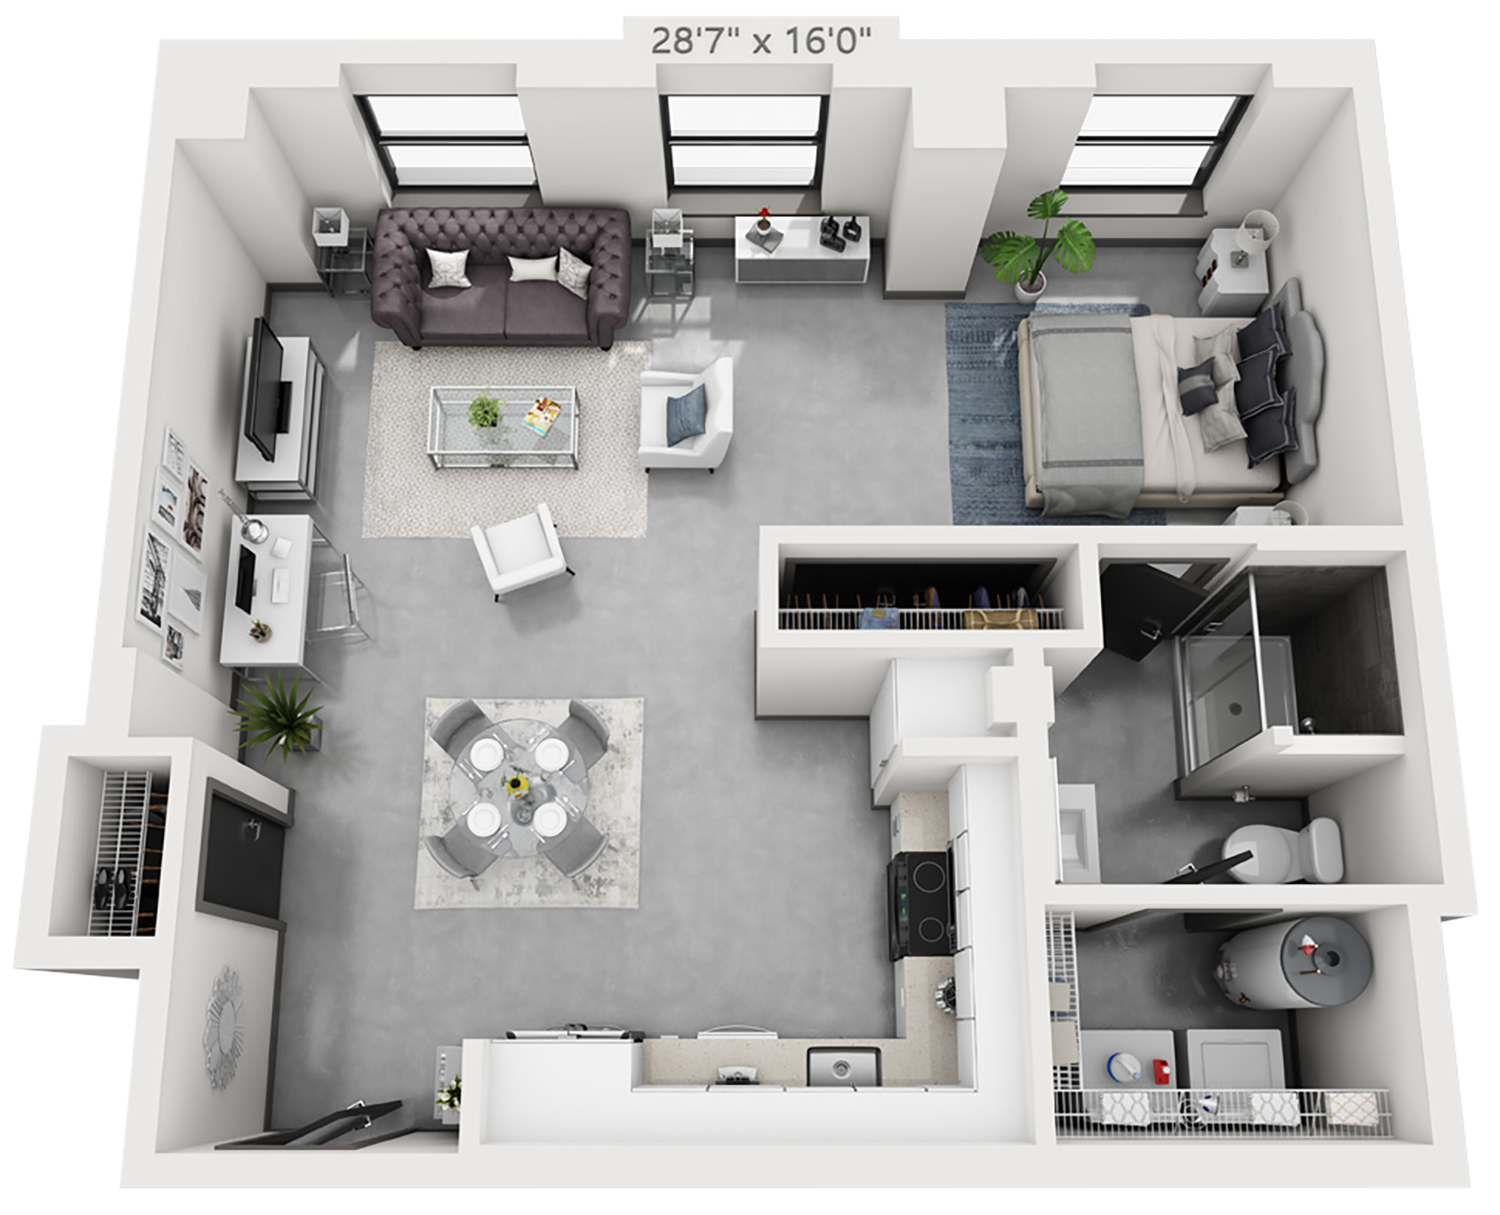 A1 plan is 1 bed, 1 bath and 750 square feet